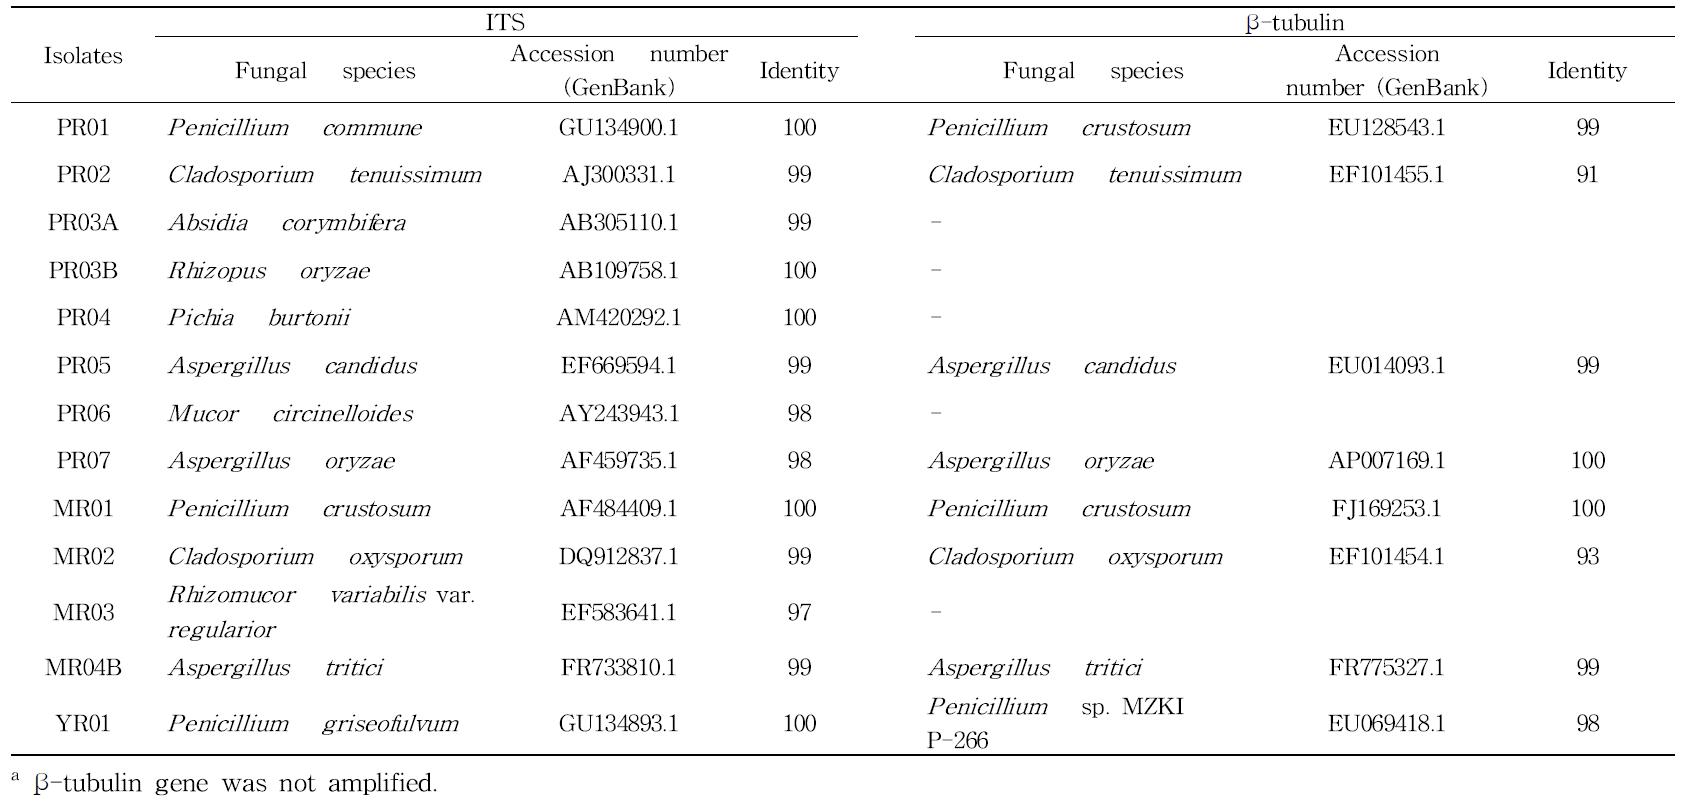 Molecular identification of fungal species isolated from rice meju by using ITS and β-tubulin gene sequences The closest match was determined by sequencing and BLASTn rescue of ITS and β-tubulin sequences in GenBank